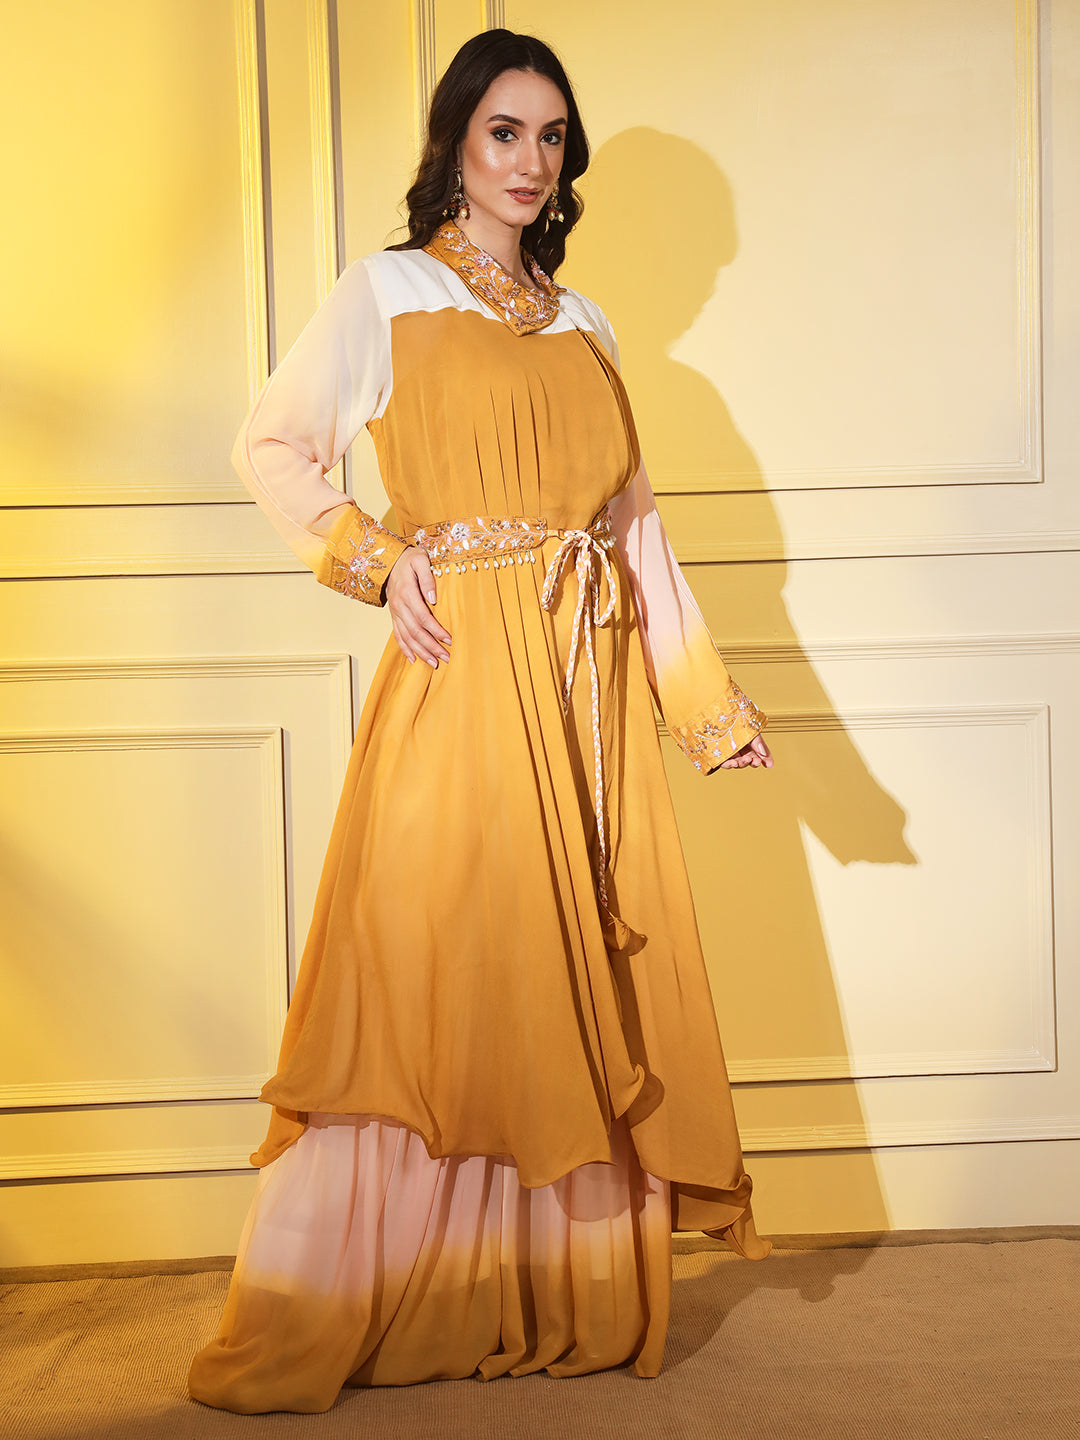 Sunshine Style: Women's Designer 3-Piece Yellow and White Set with Wrap Around Jacket and Embroidered Belt | Hues of India